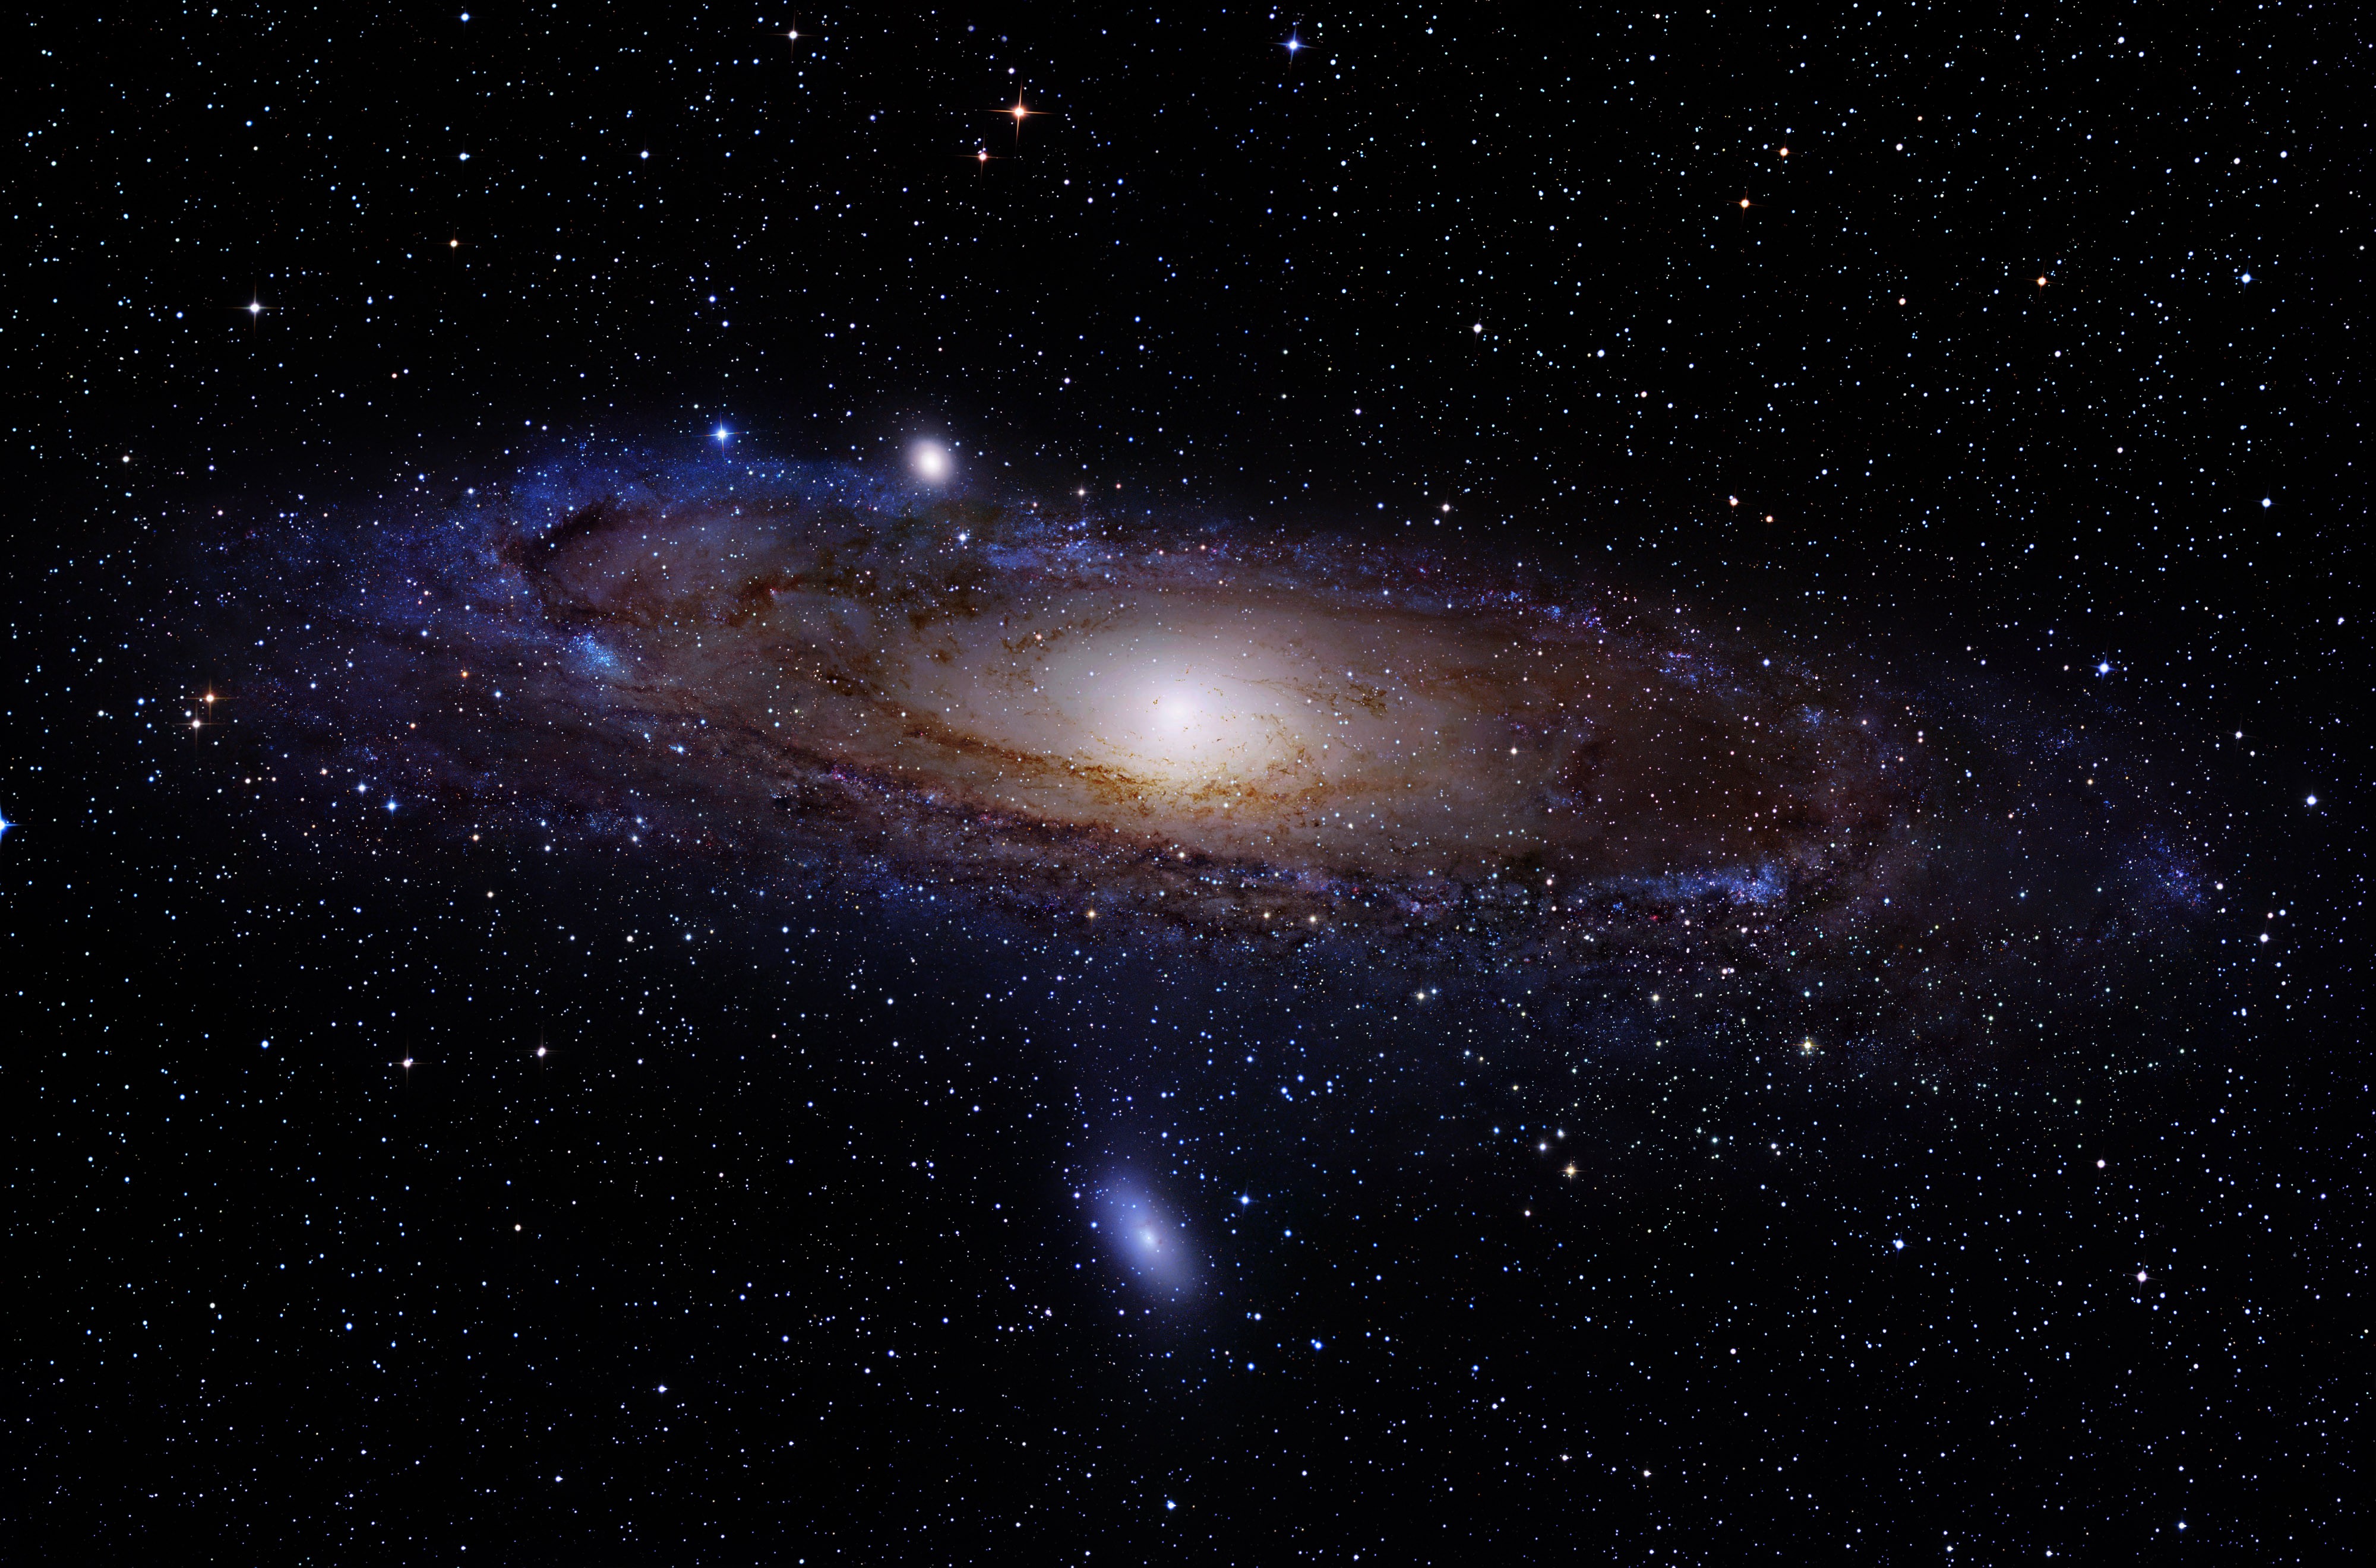 Andromeda Space Galaxy Messier 31 Messier 110 4000x2640